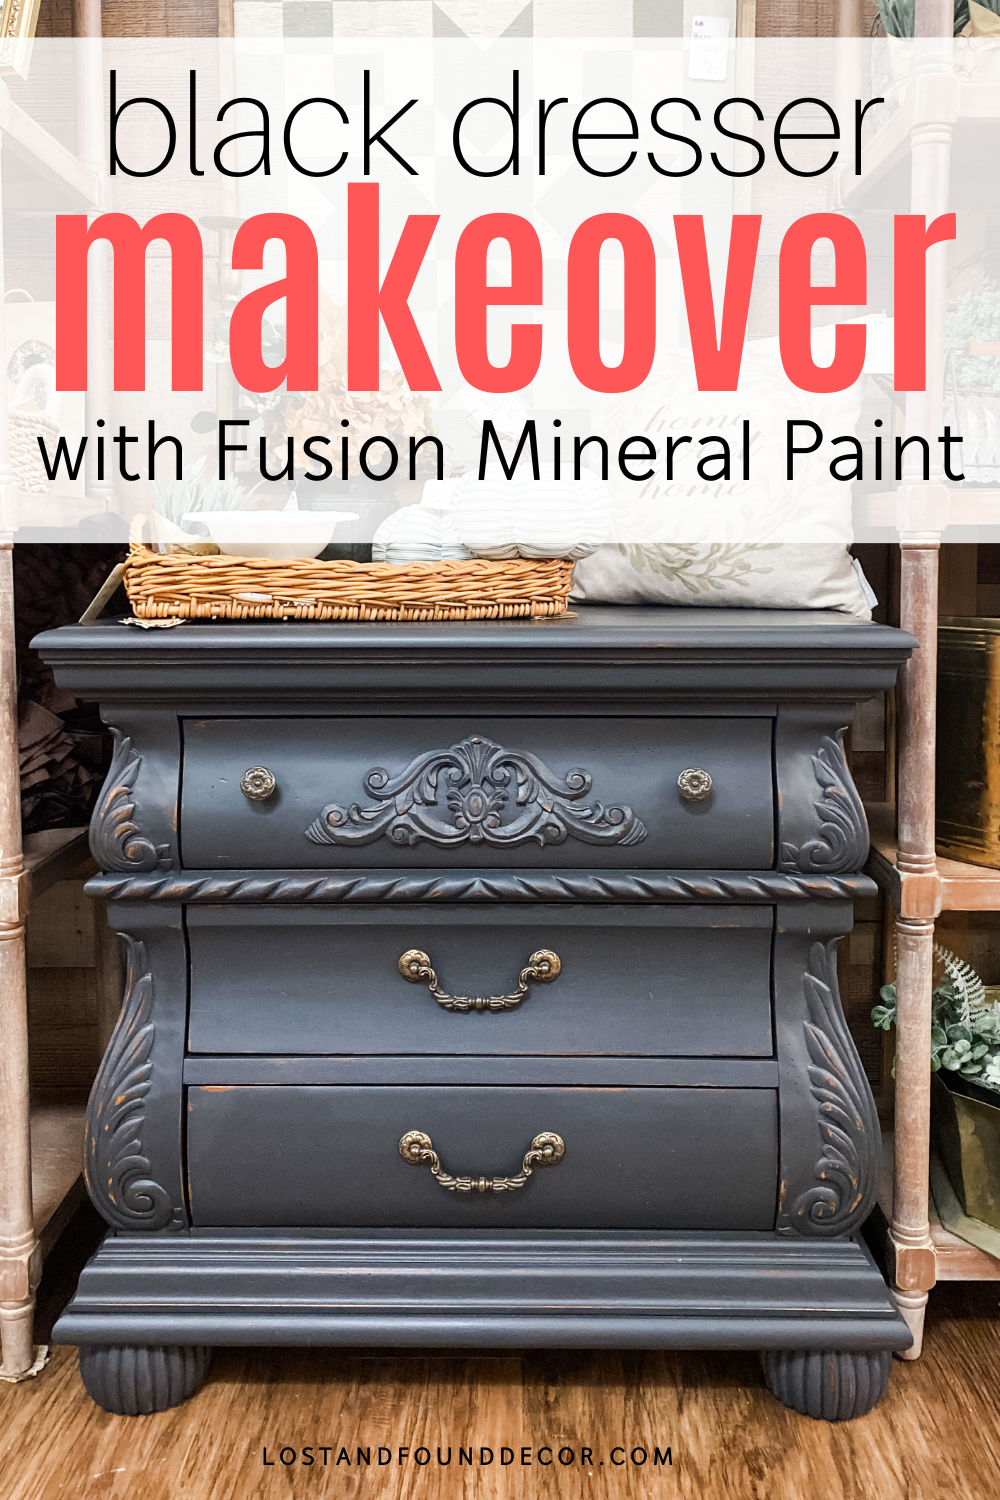 Vintage Dresser Makeover with Fusion Mineral Paint - Saw Nail and